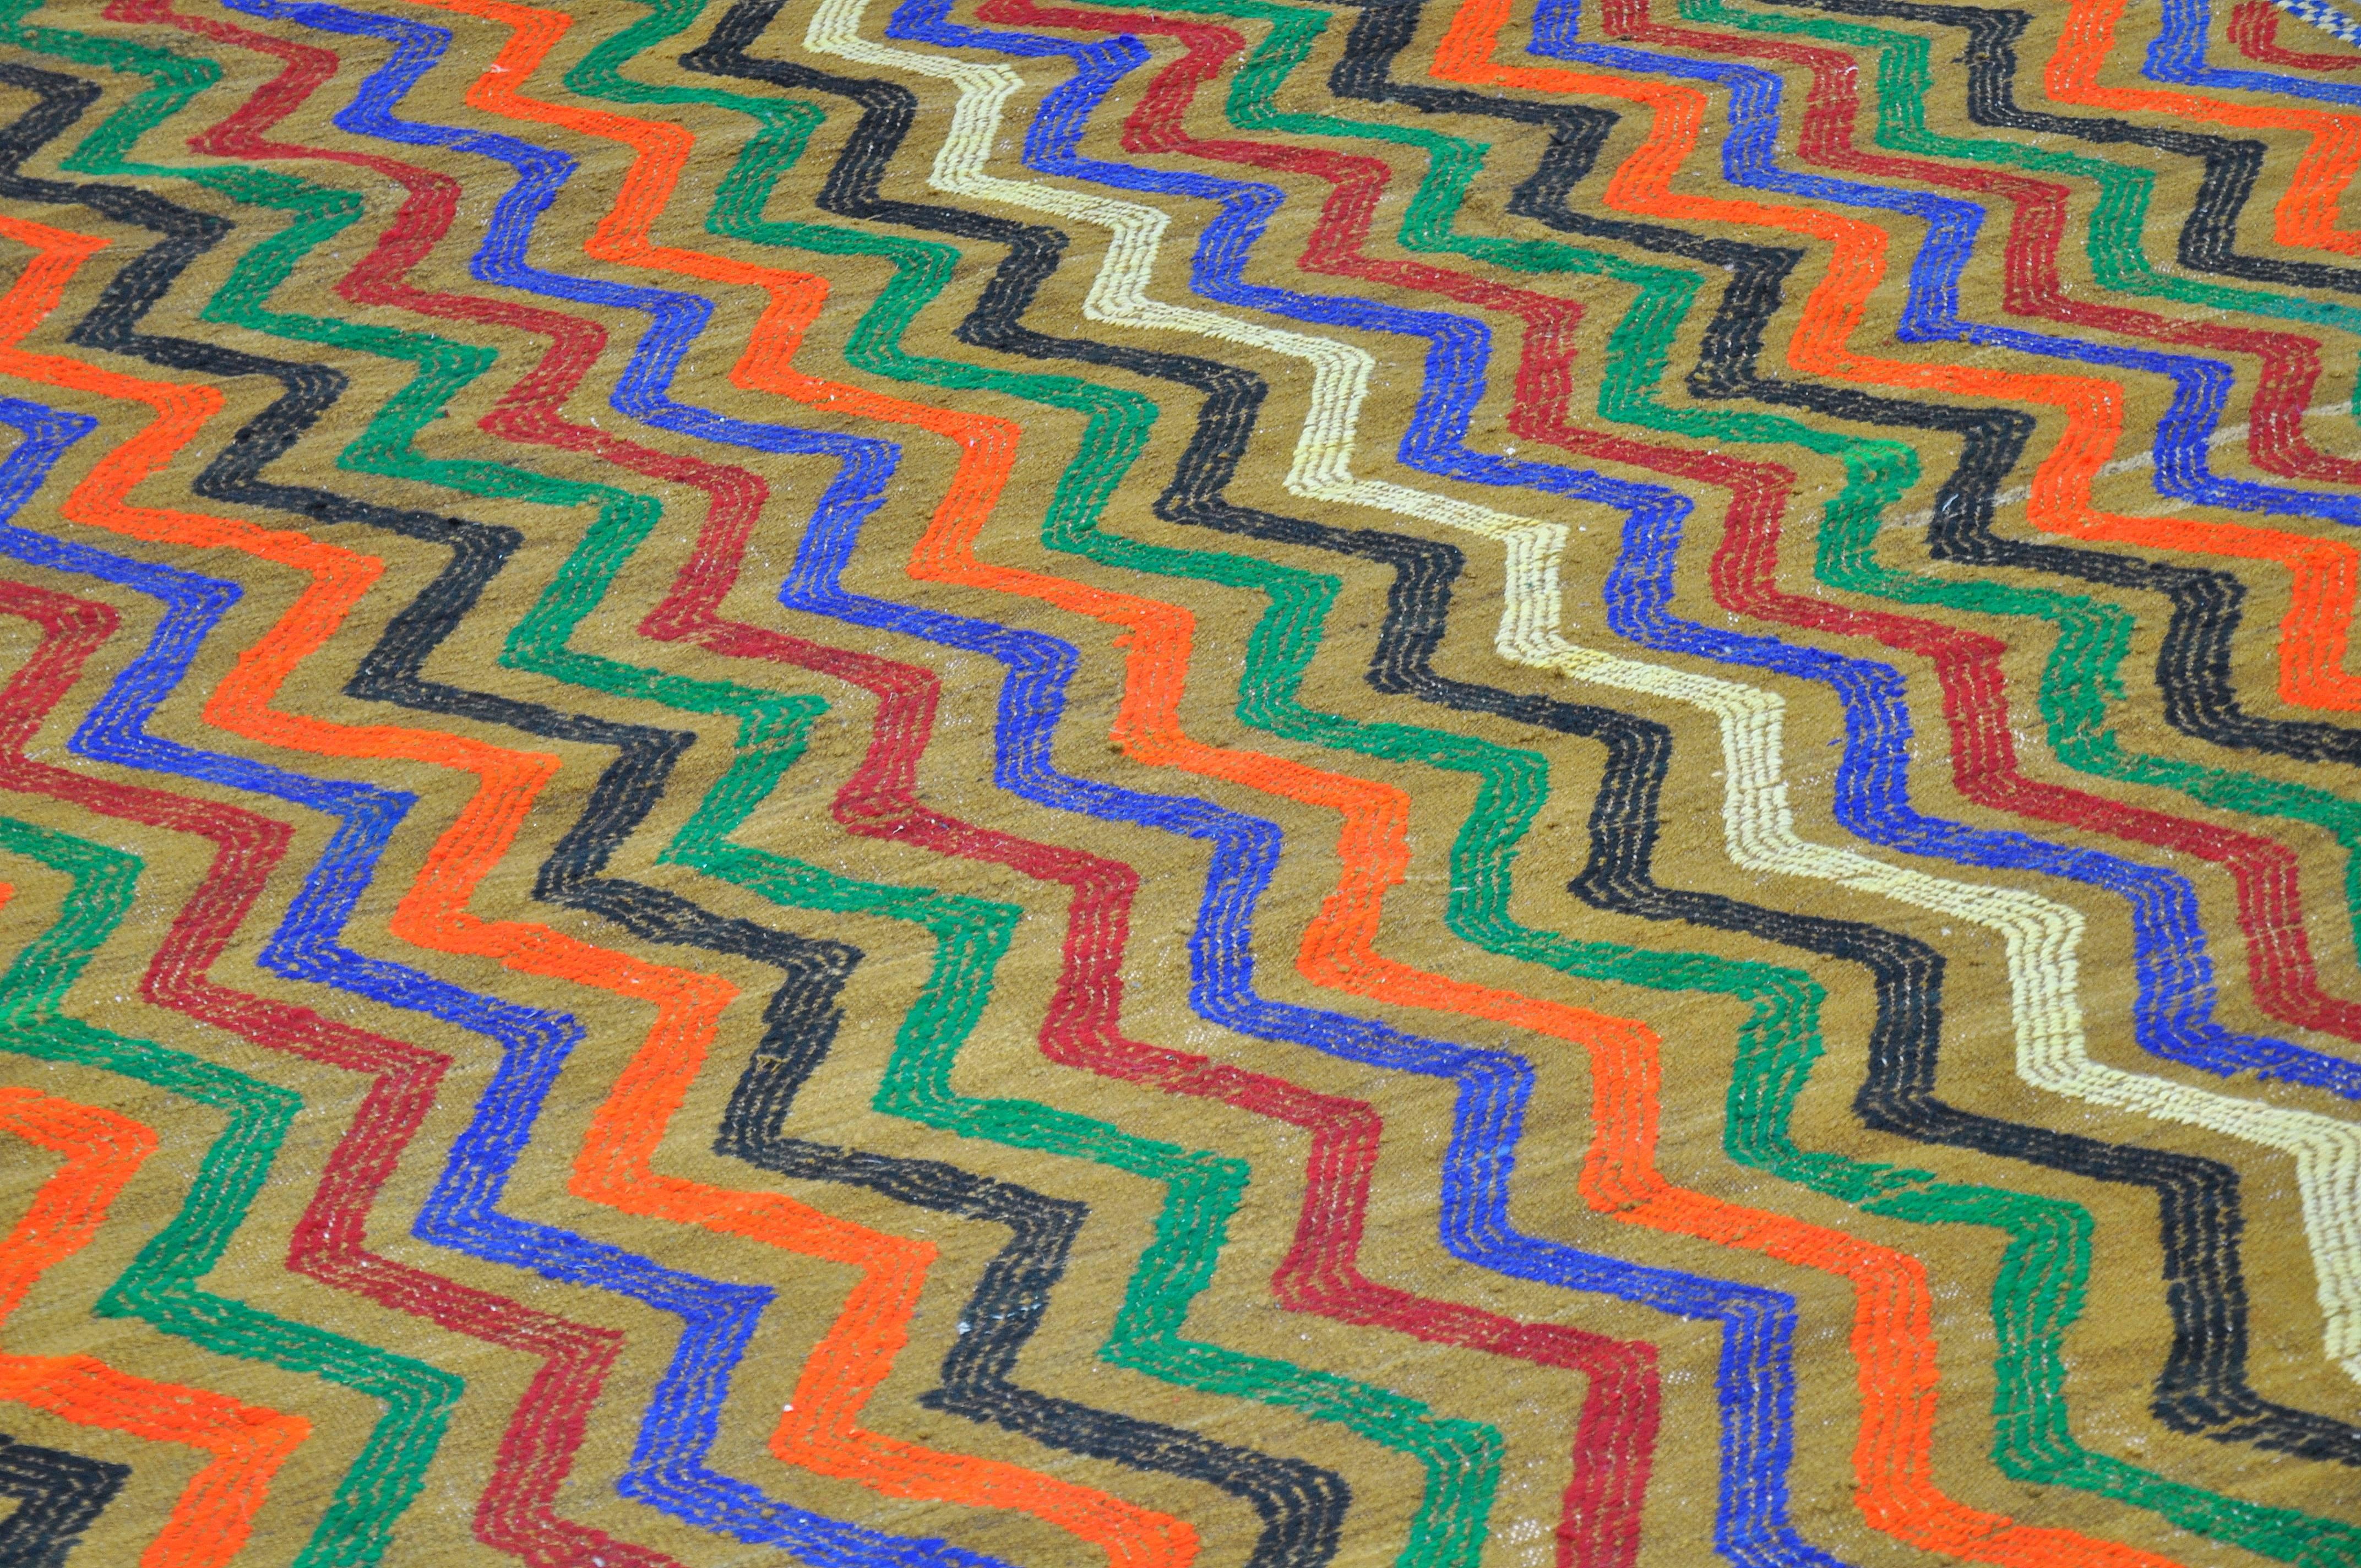 A large and thick vintage Kilim hand-knotted wool rug with vibrant red, orange, blue, green and cream zig zag patterns and tribal motifs on a light olive green background. Made with hand-spun wool and natural dyes. Works very well with Danish,